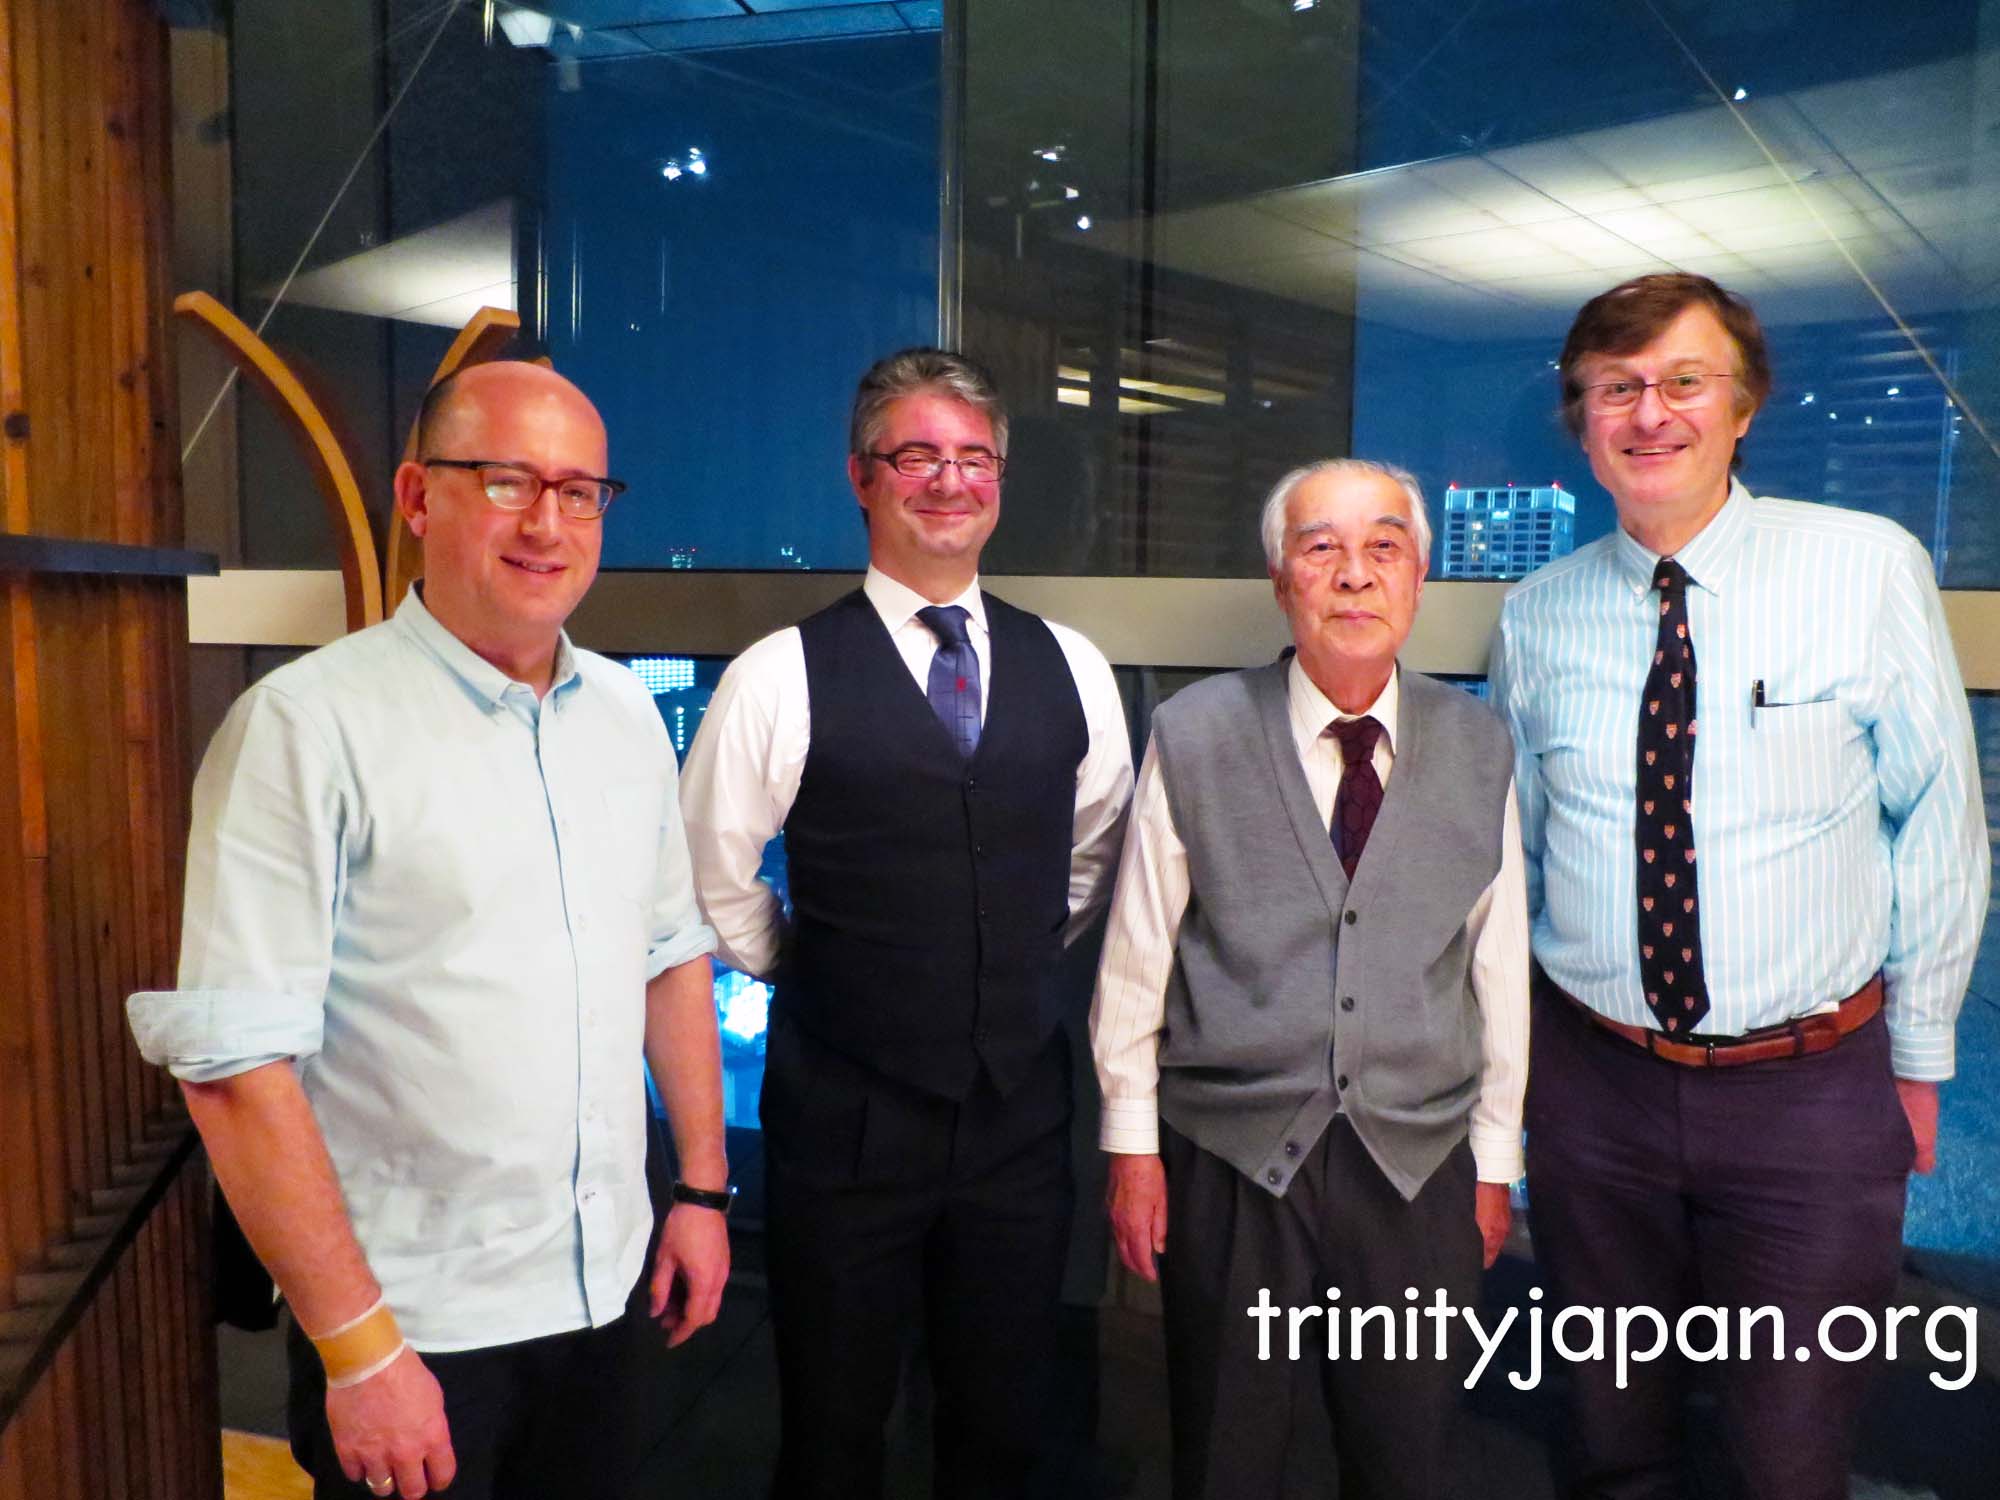 4th Trinity in Japan Society meeting in Tokyo on Friday 30 October 2015